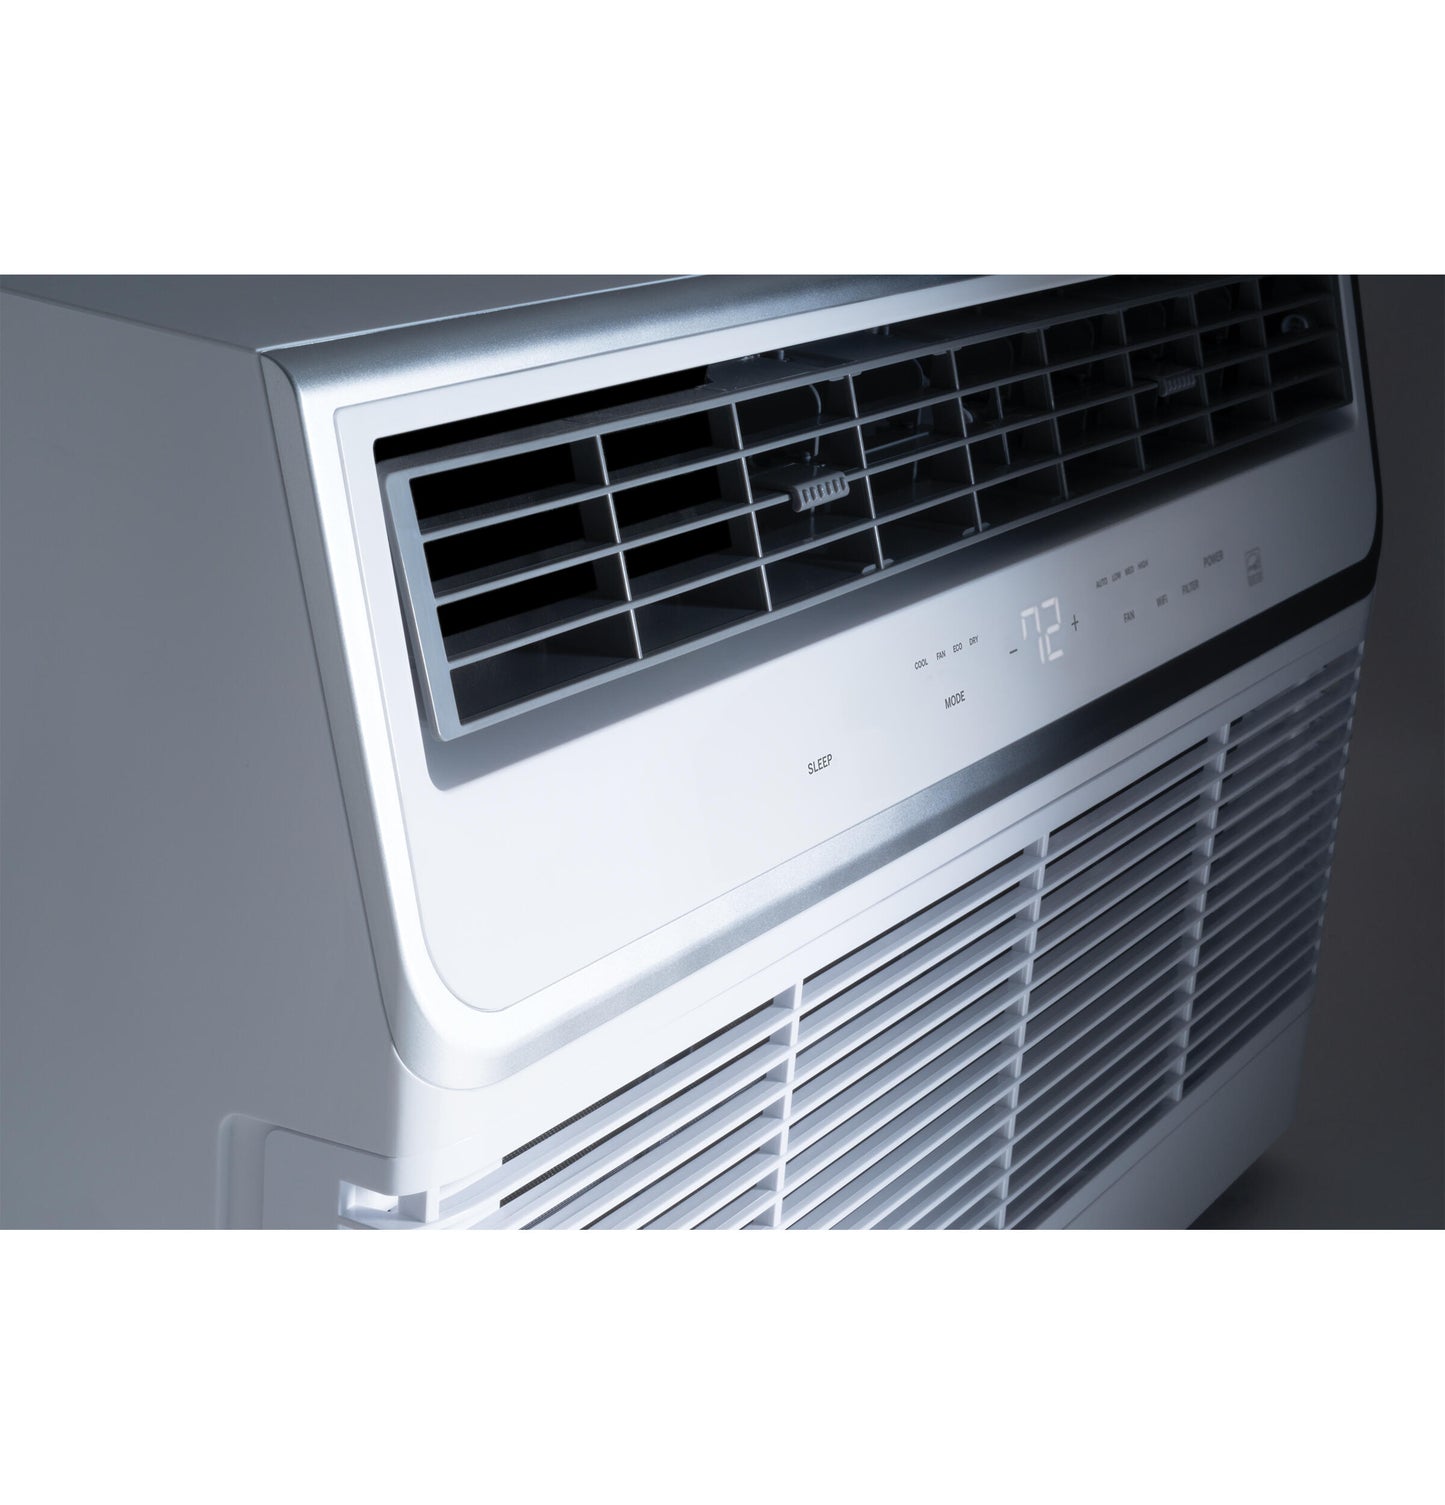 Ge Appliances AJCQ14DWH Ge® 230/208 Volt Built-In Cool-Only Room Air Conditioner